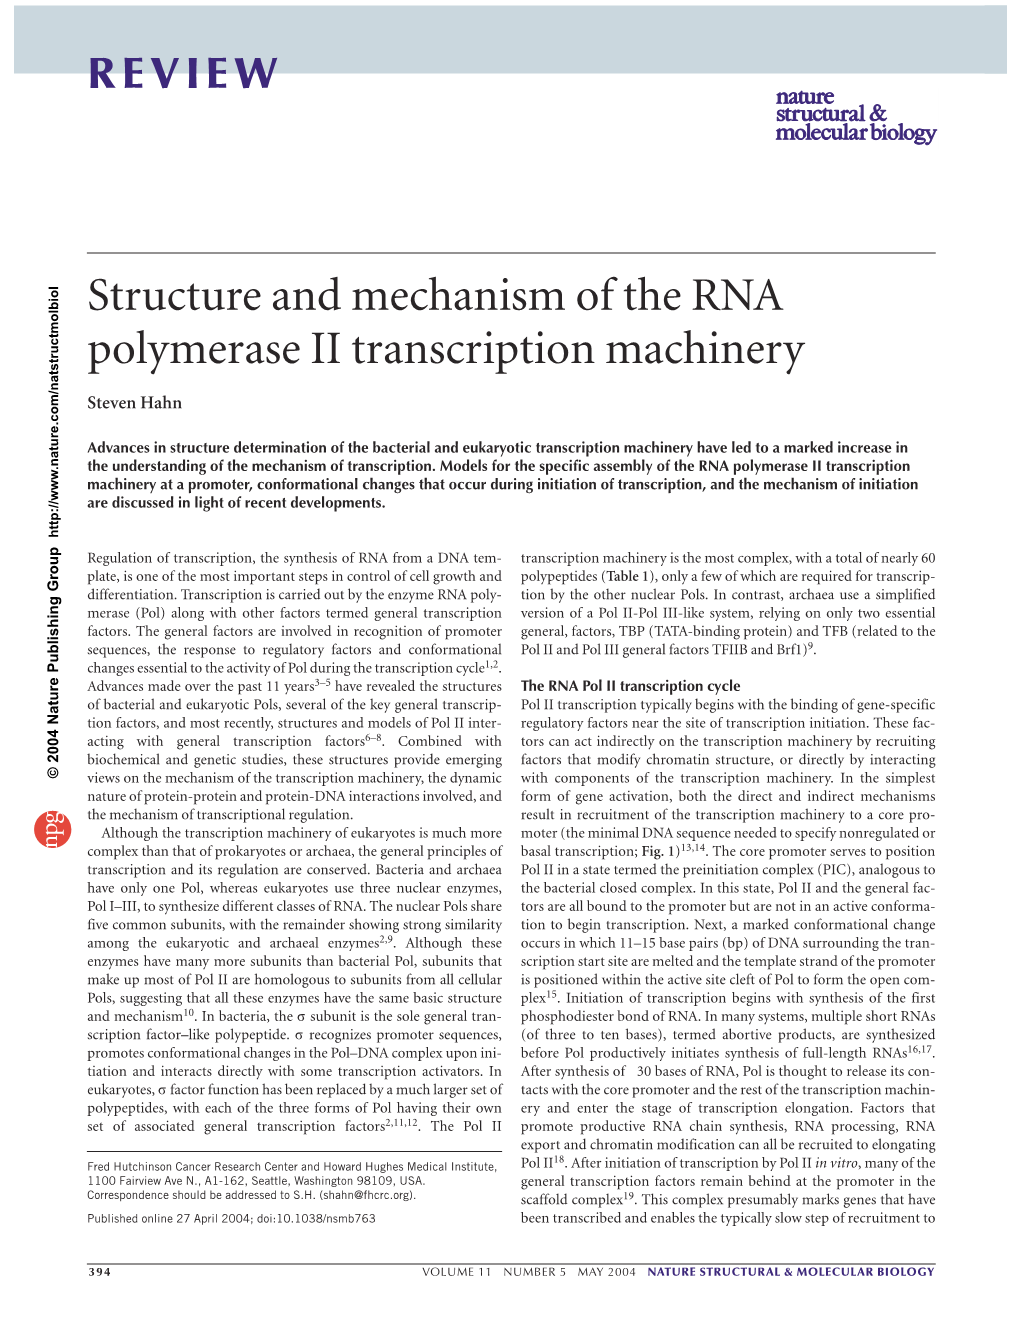 Structure and Mechanism of the RNA Polymerase II Transcription Machinery